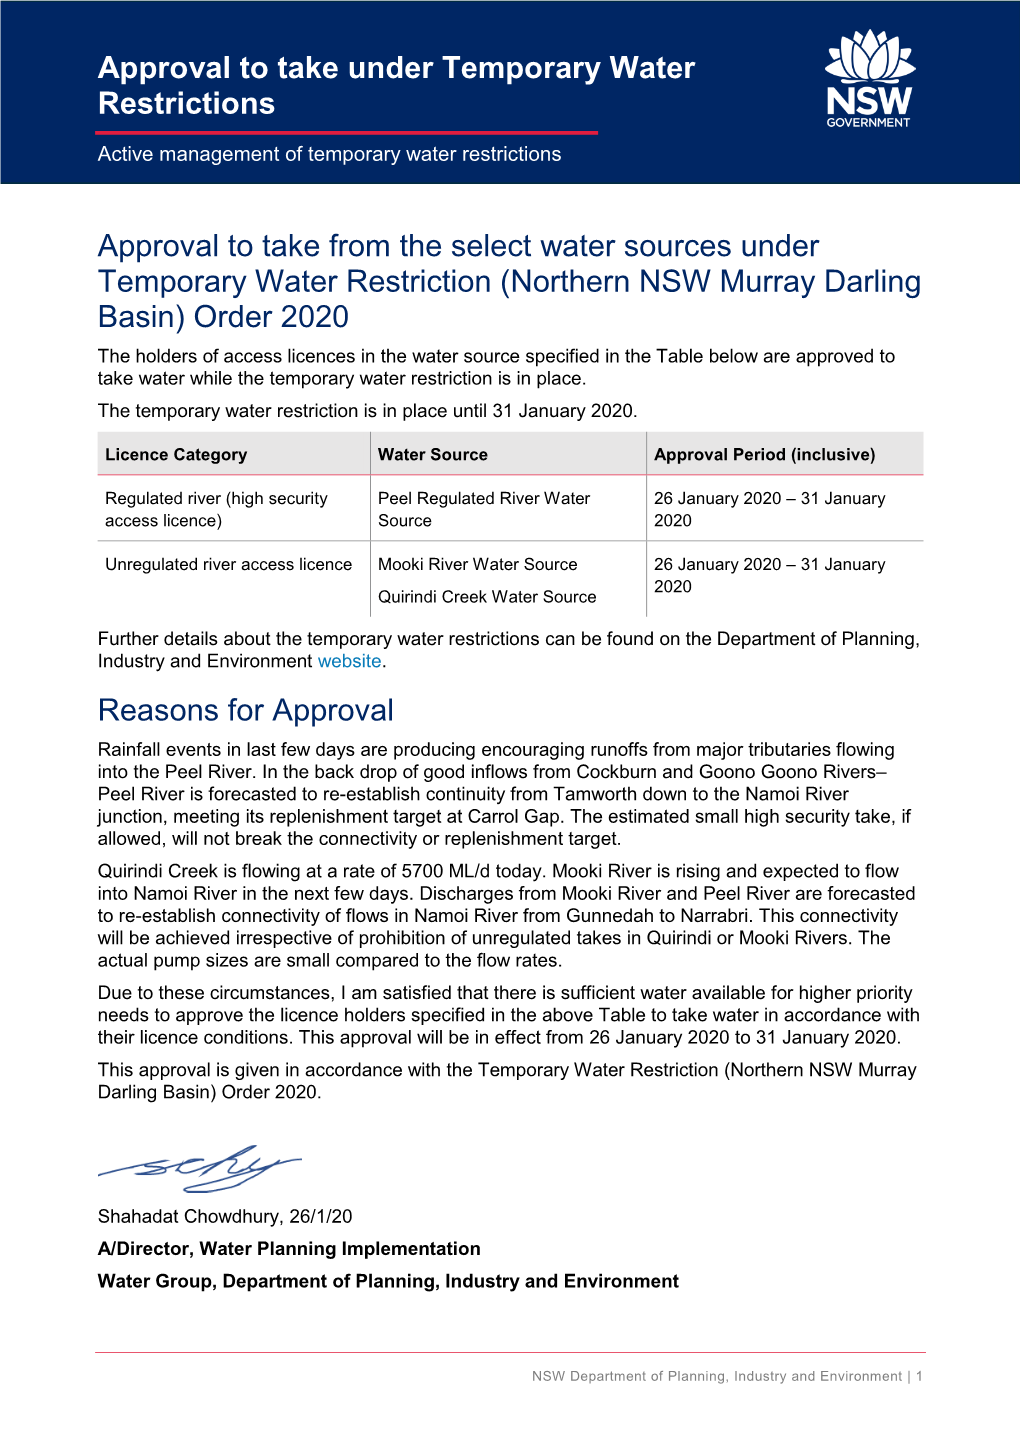 Approval to Take Under Temporary Water Restrictions